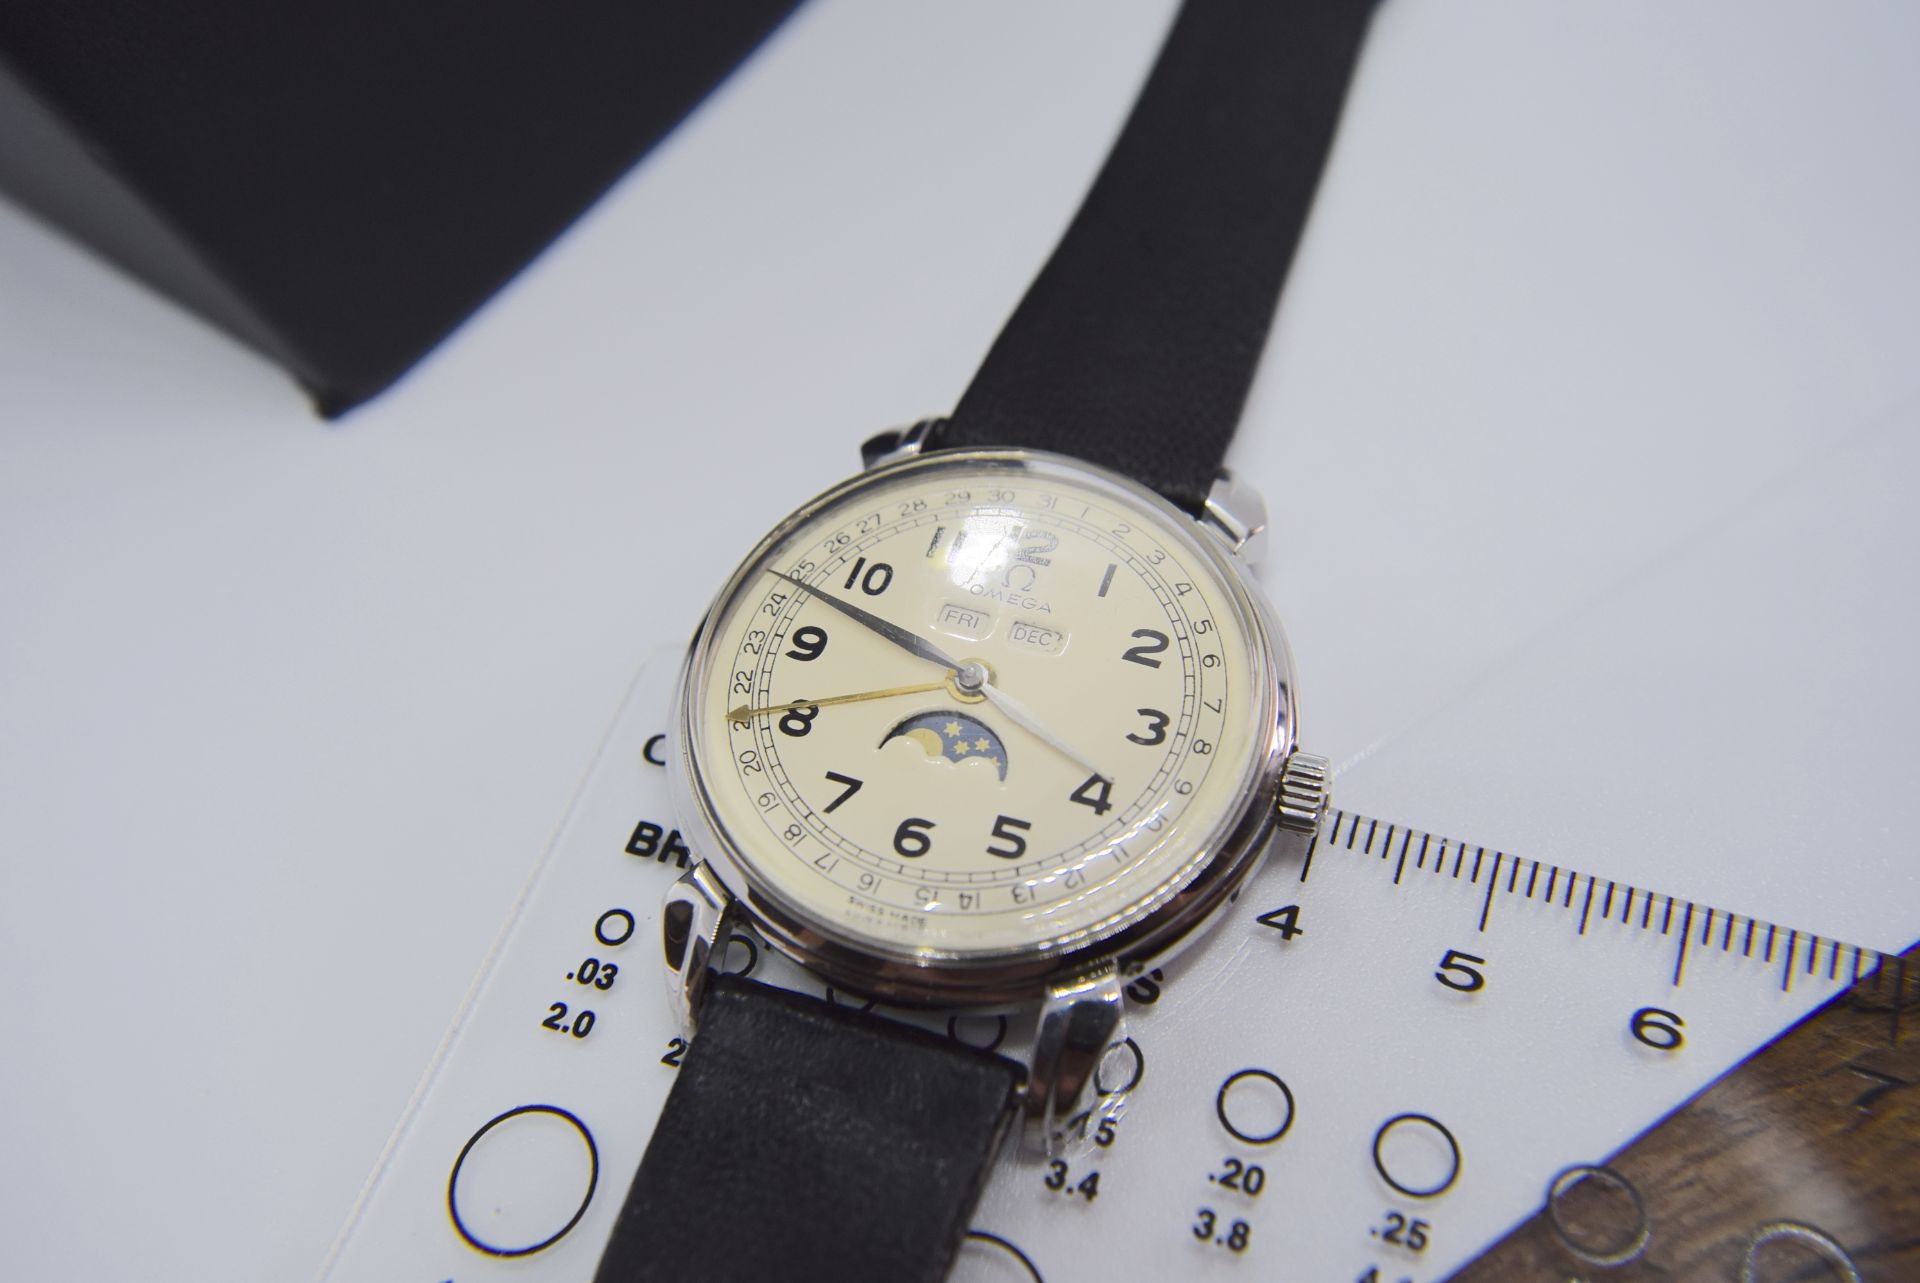 OMEGA MANUAL WIND MOONPHASE WATCH - HALLMARKED OMEGA WATCH CO. / 623846 - MOVEMENT 715 / 37045922 - Image 4 of 9